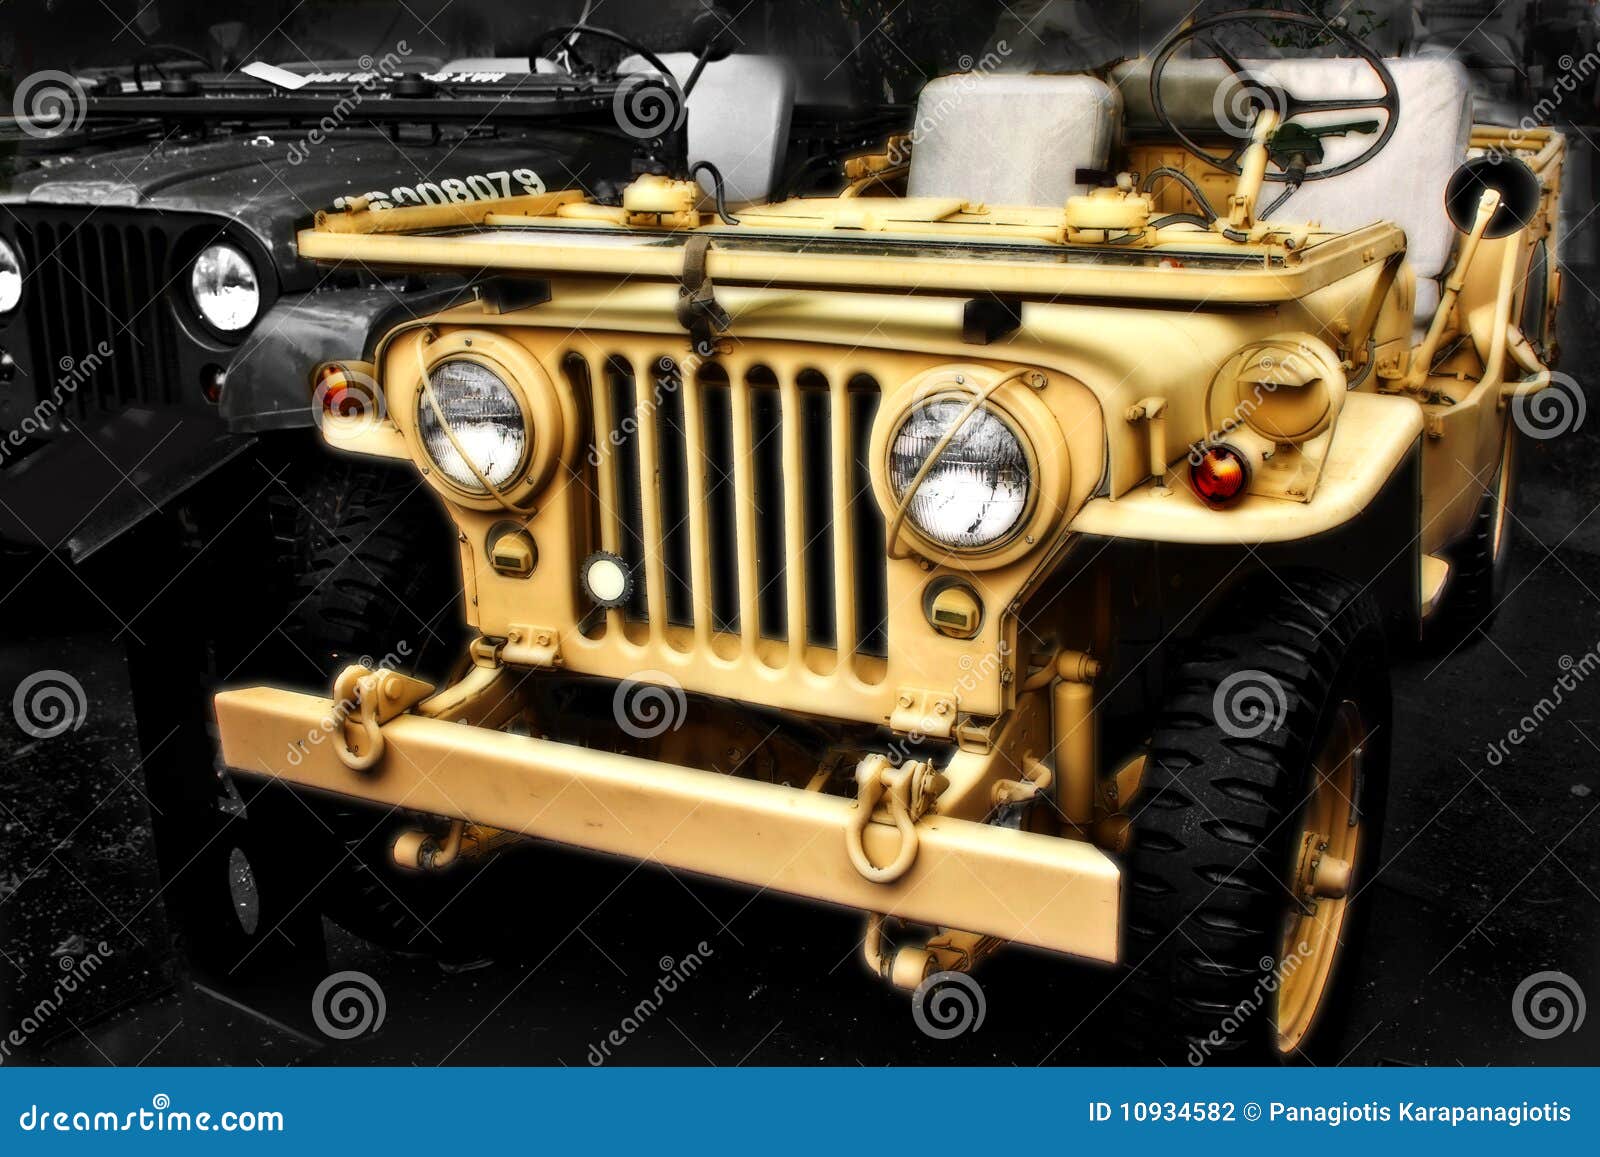 collectible old ww2 jeep vehicle